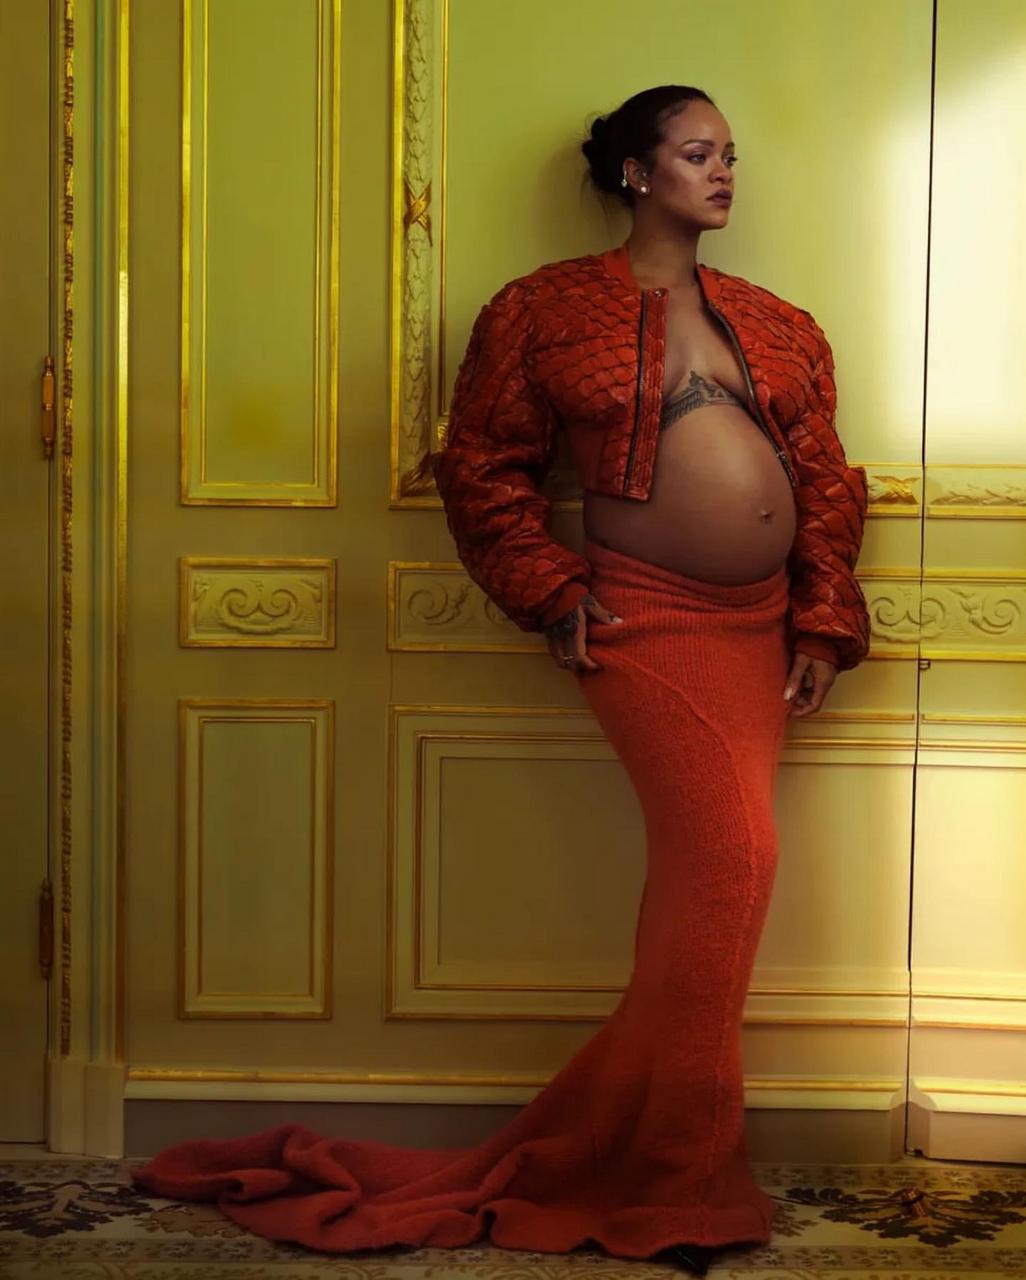 From Rihannas Pregnant Shoot Shes Never Looked Better NSFW